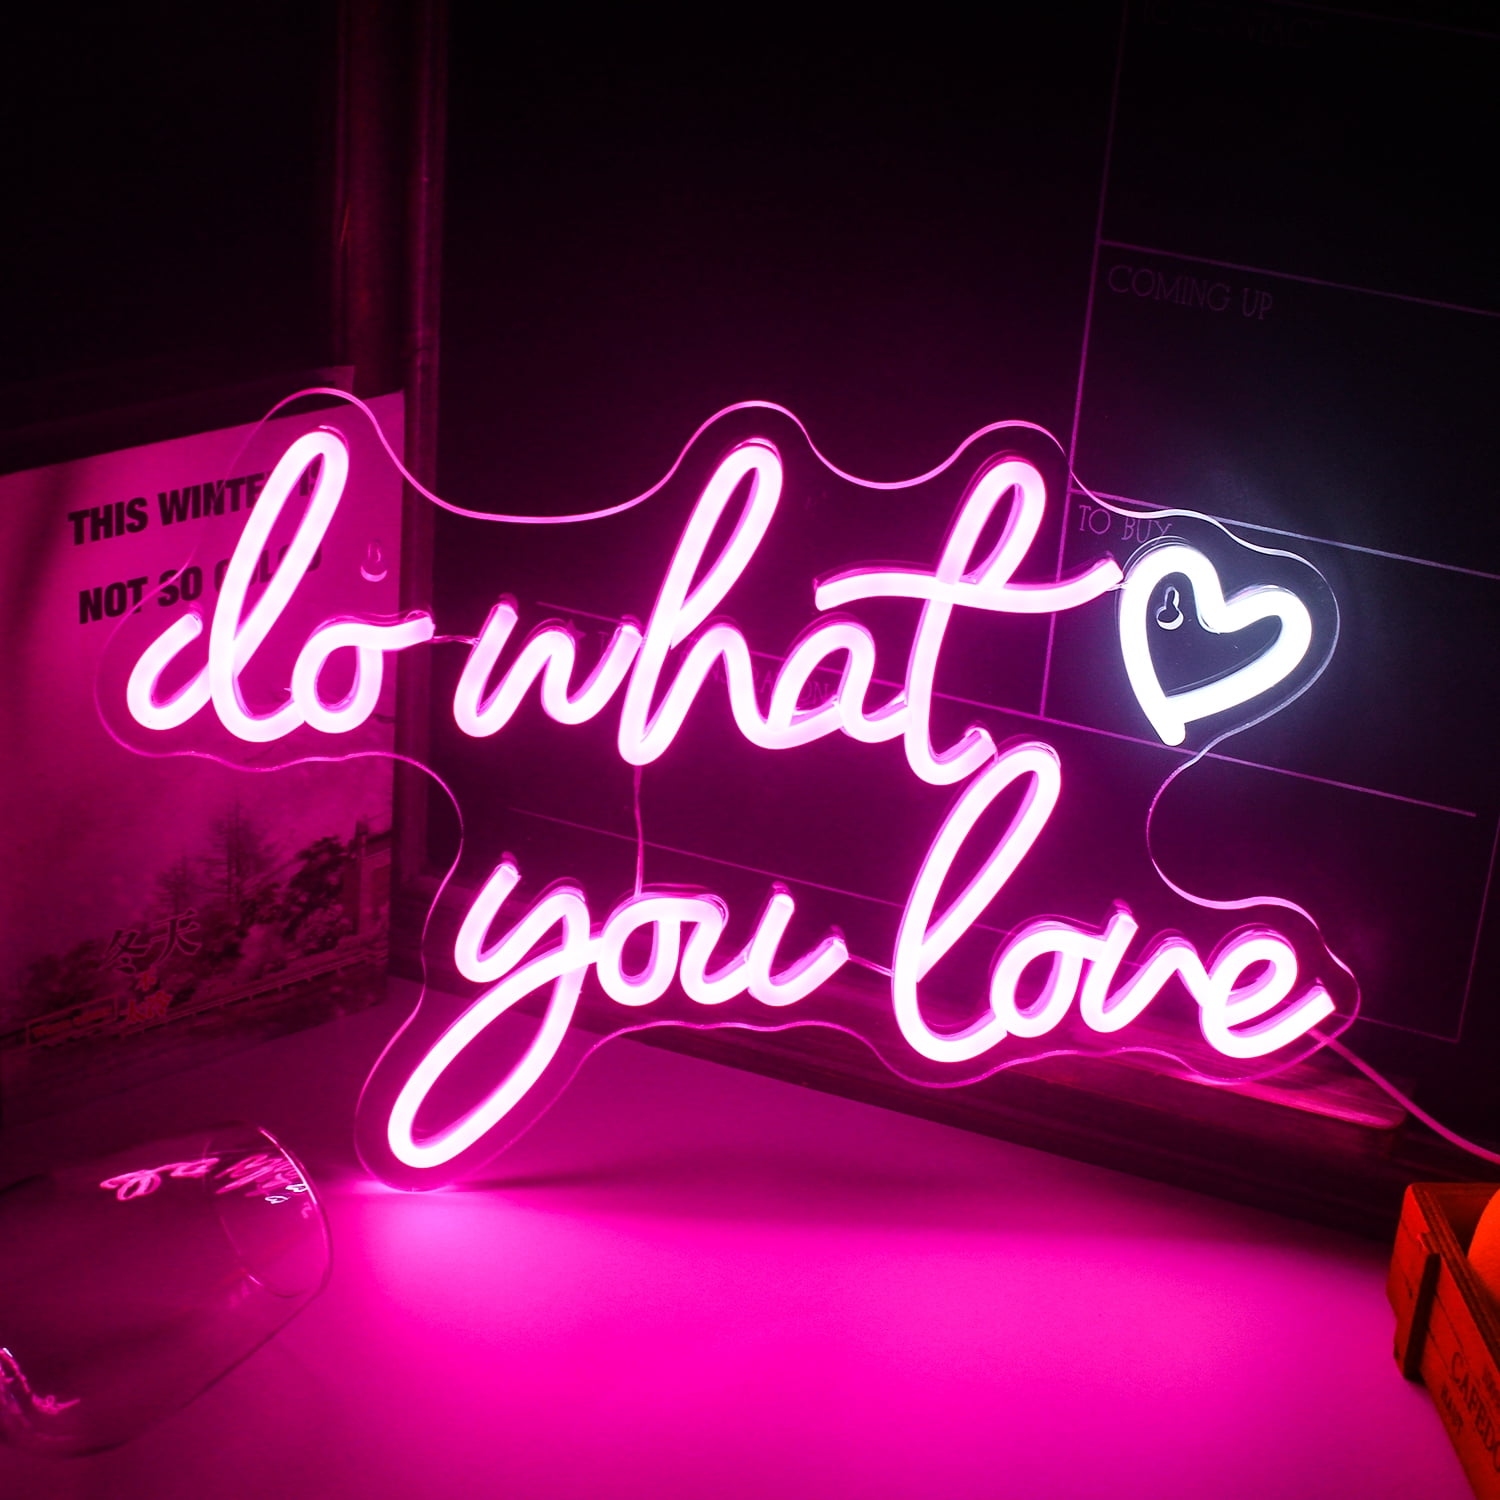 LED Neon Sign Do what you love – The Neon Company